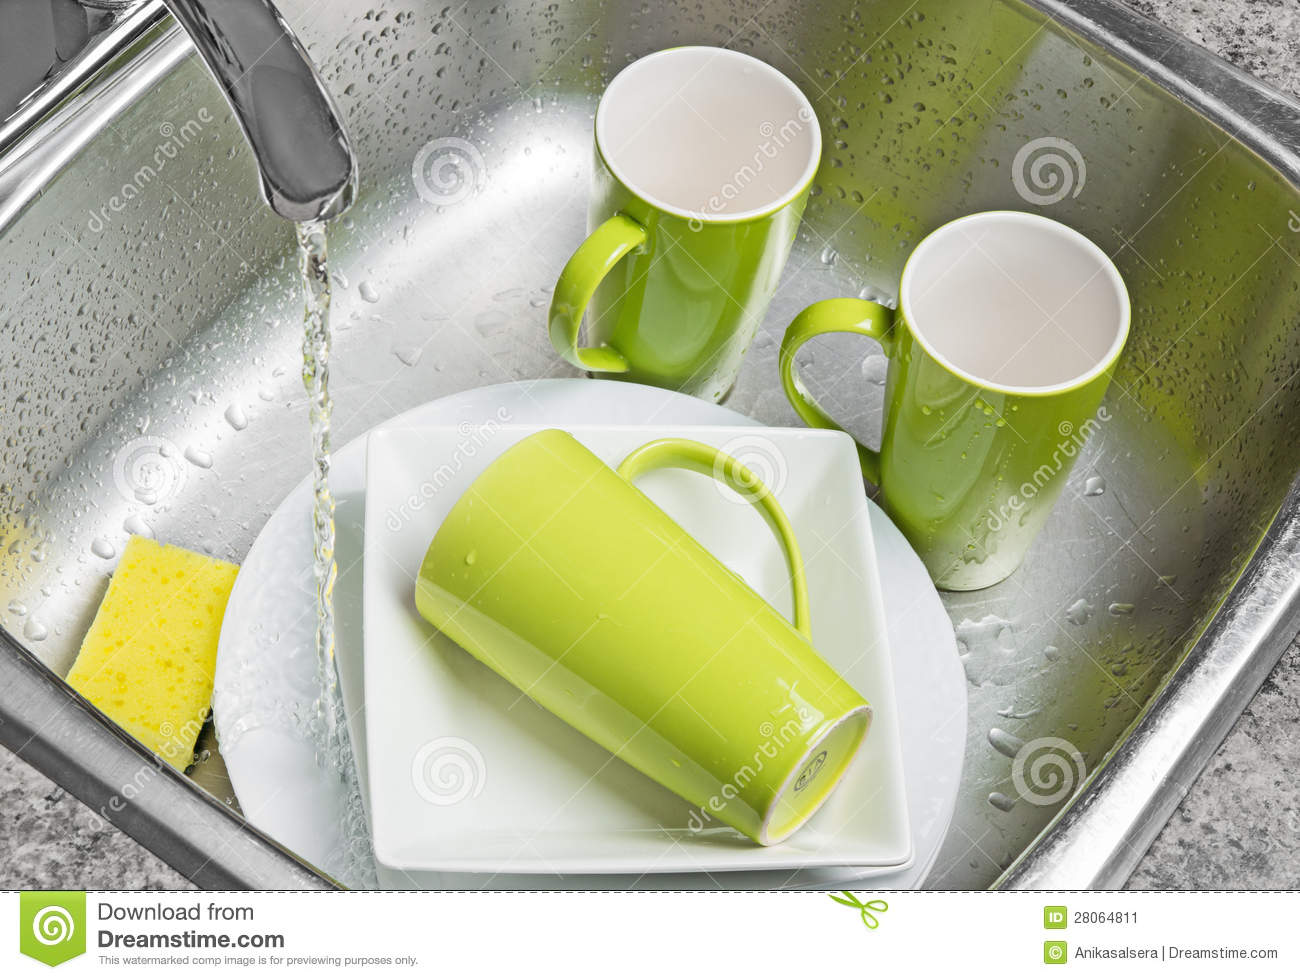 Washing Green Cups And White Plates In The Kitchen Sink  Water Running